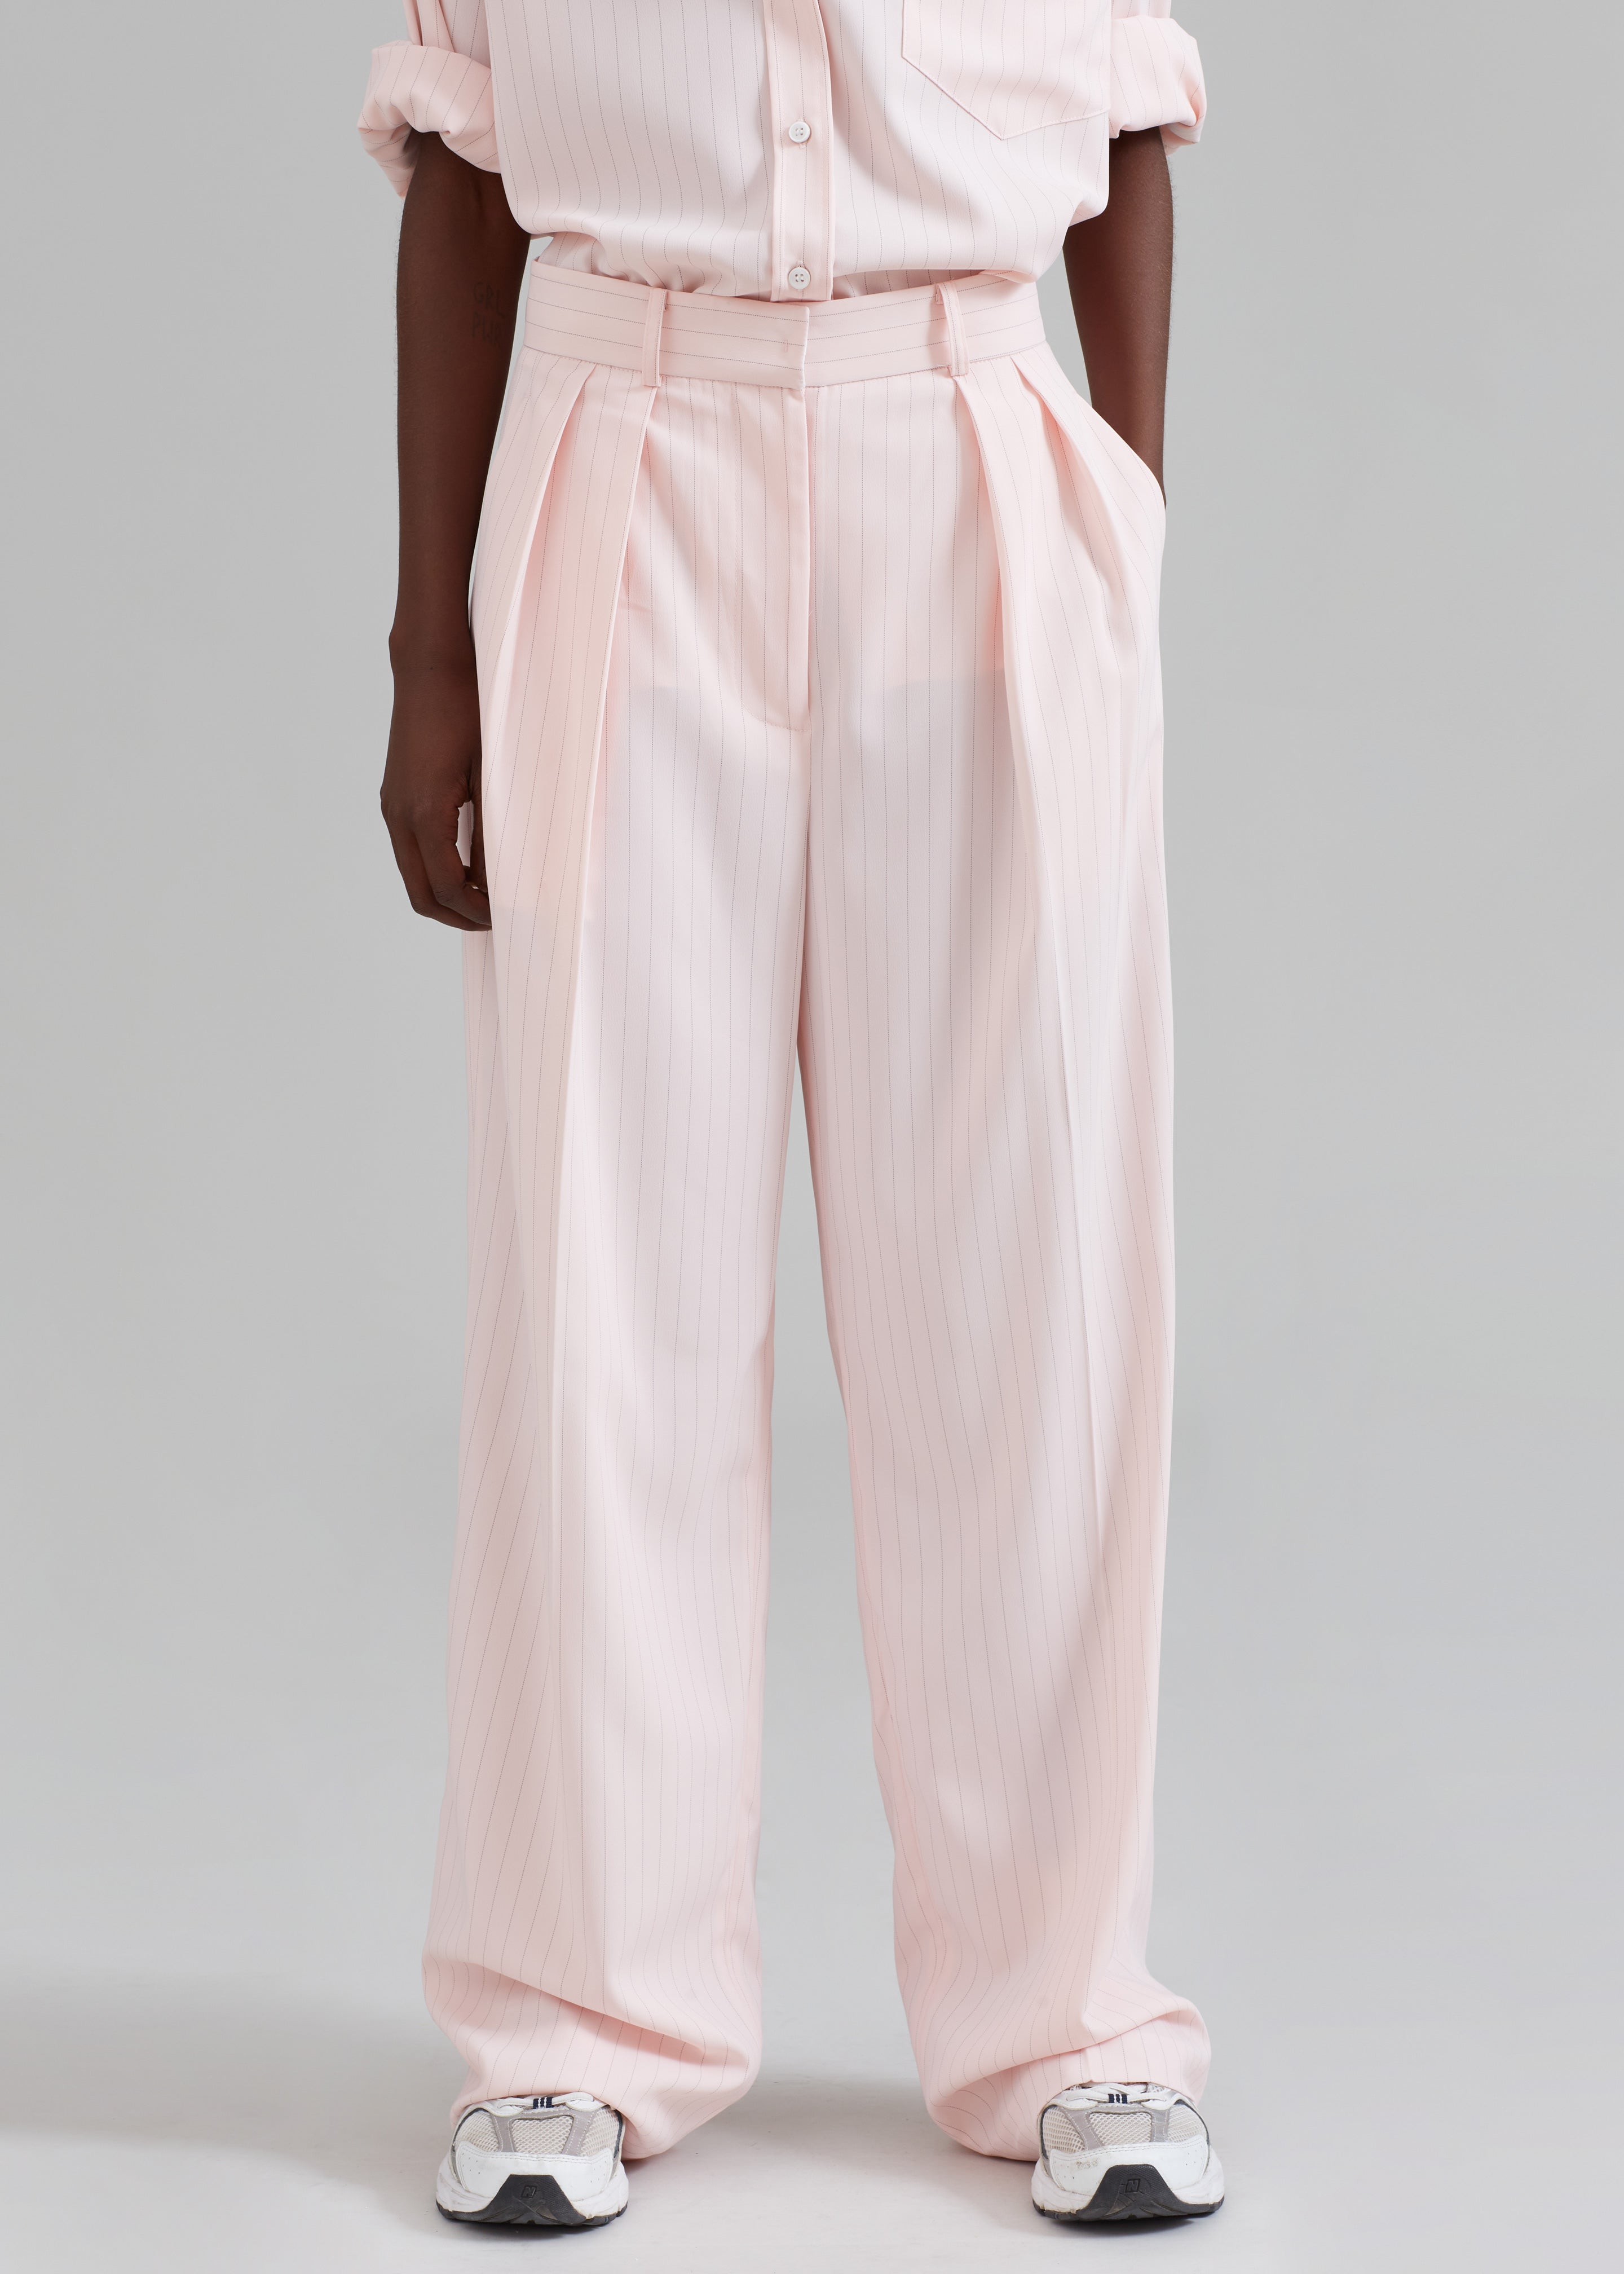 Tansy Fluid Pleated Trousers - Pink Pinstripe - 2